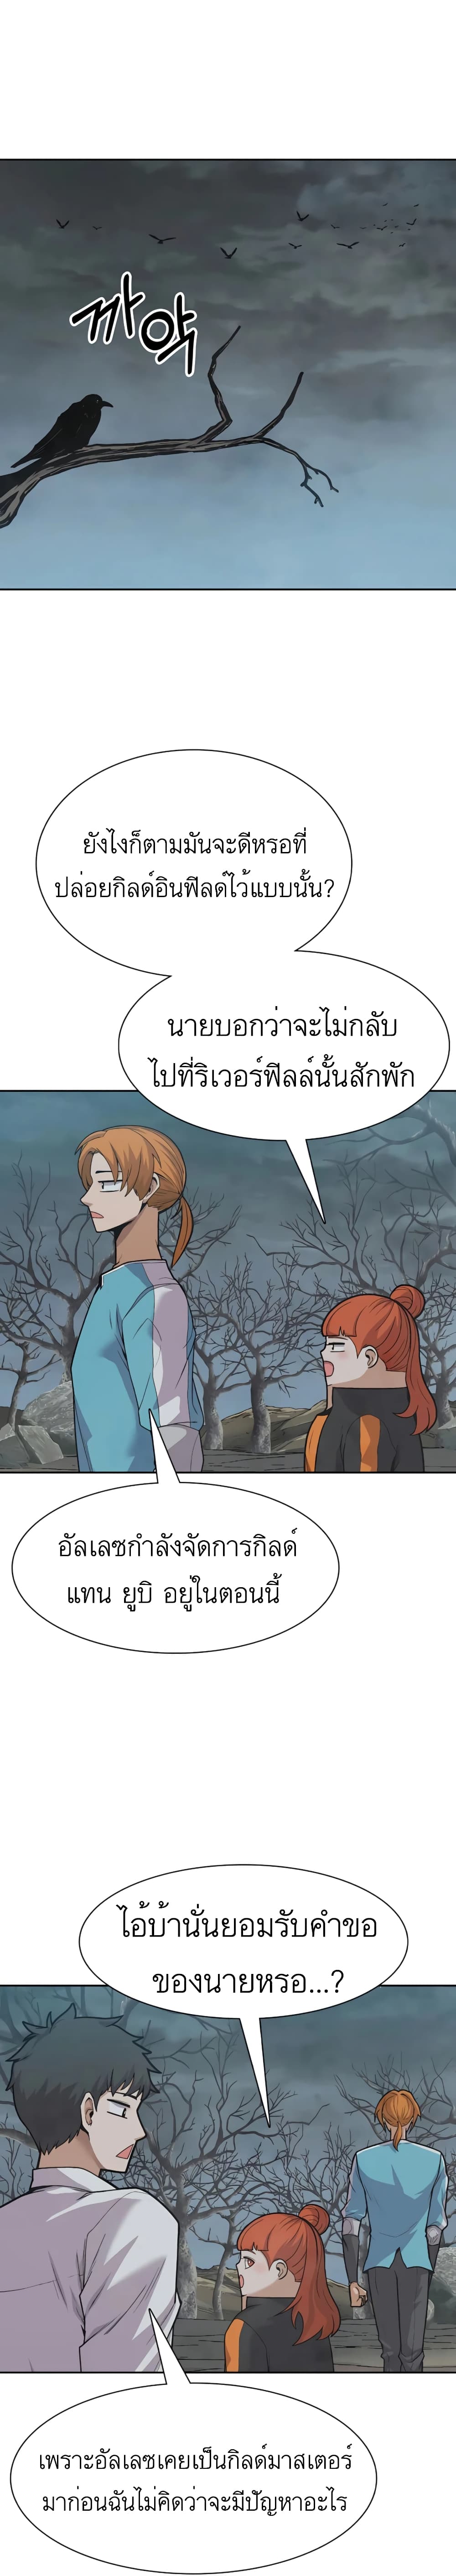 Raising Newbie Heroes In Another World ตอนที่ 24 (1)